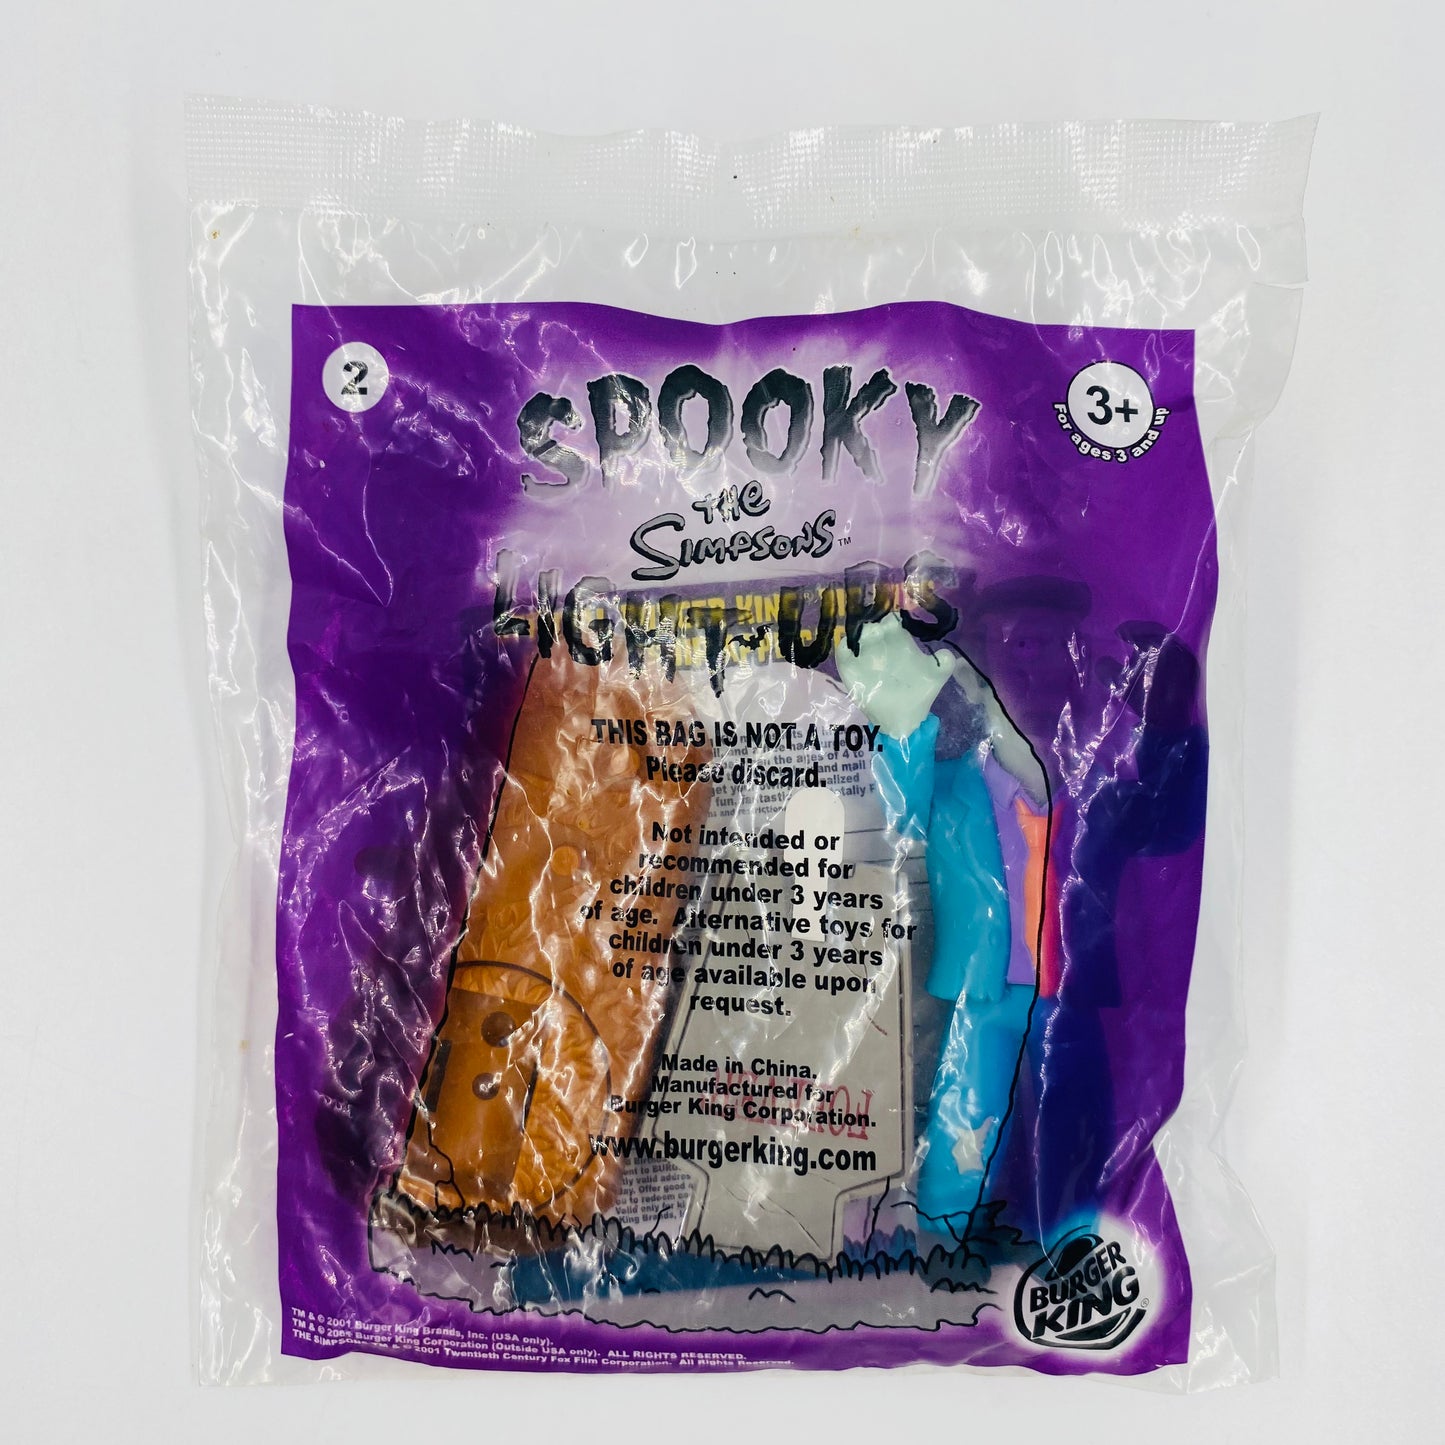 The Simpsons Spooky Light-Ups Principal Skinner Burger King Kids' Meals toy (2001) bagged